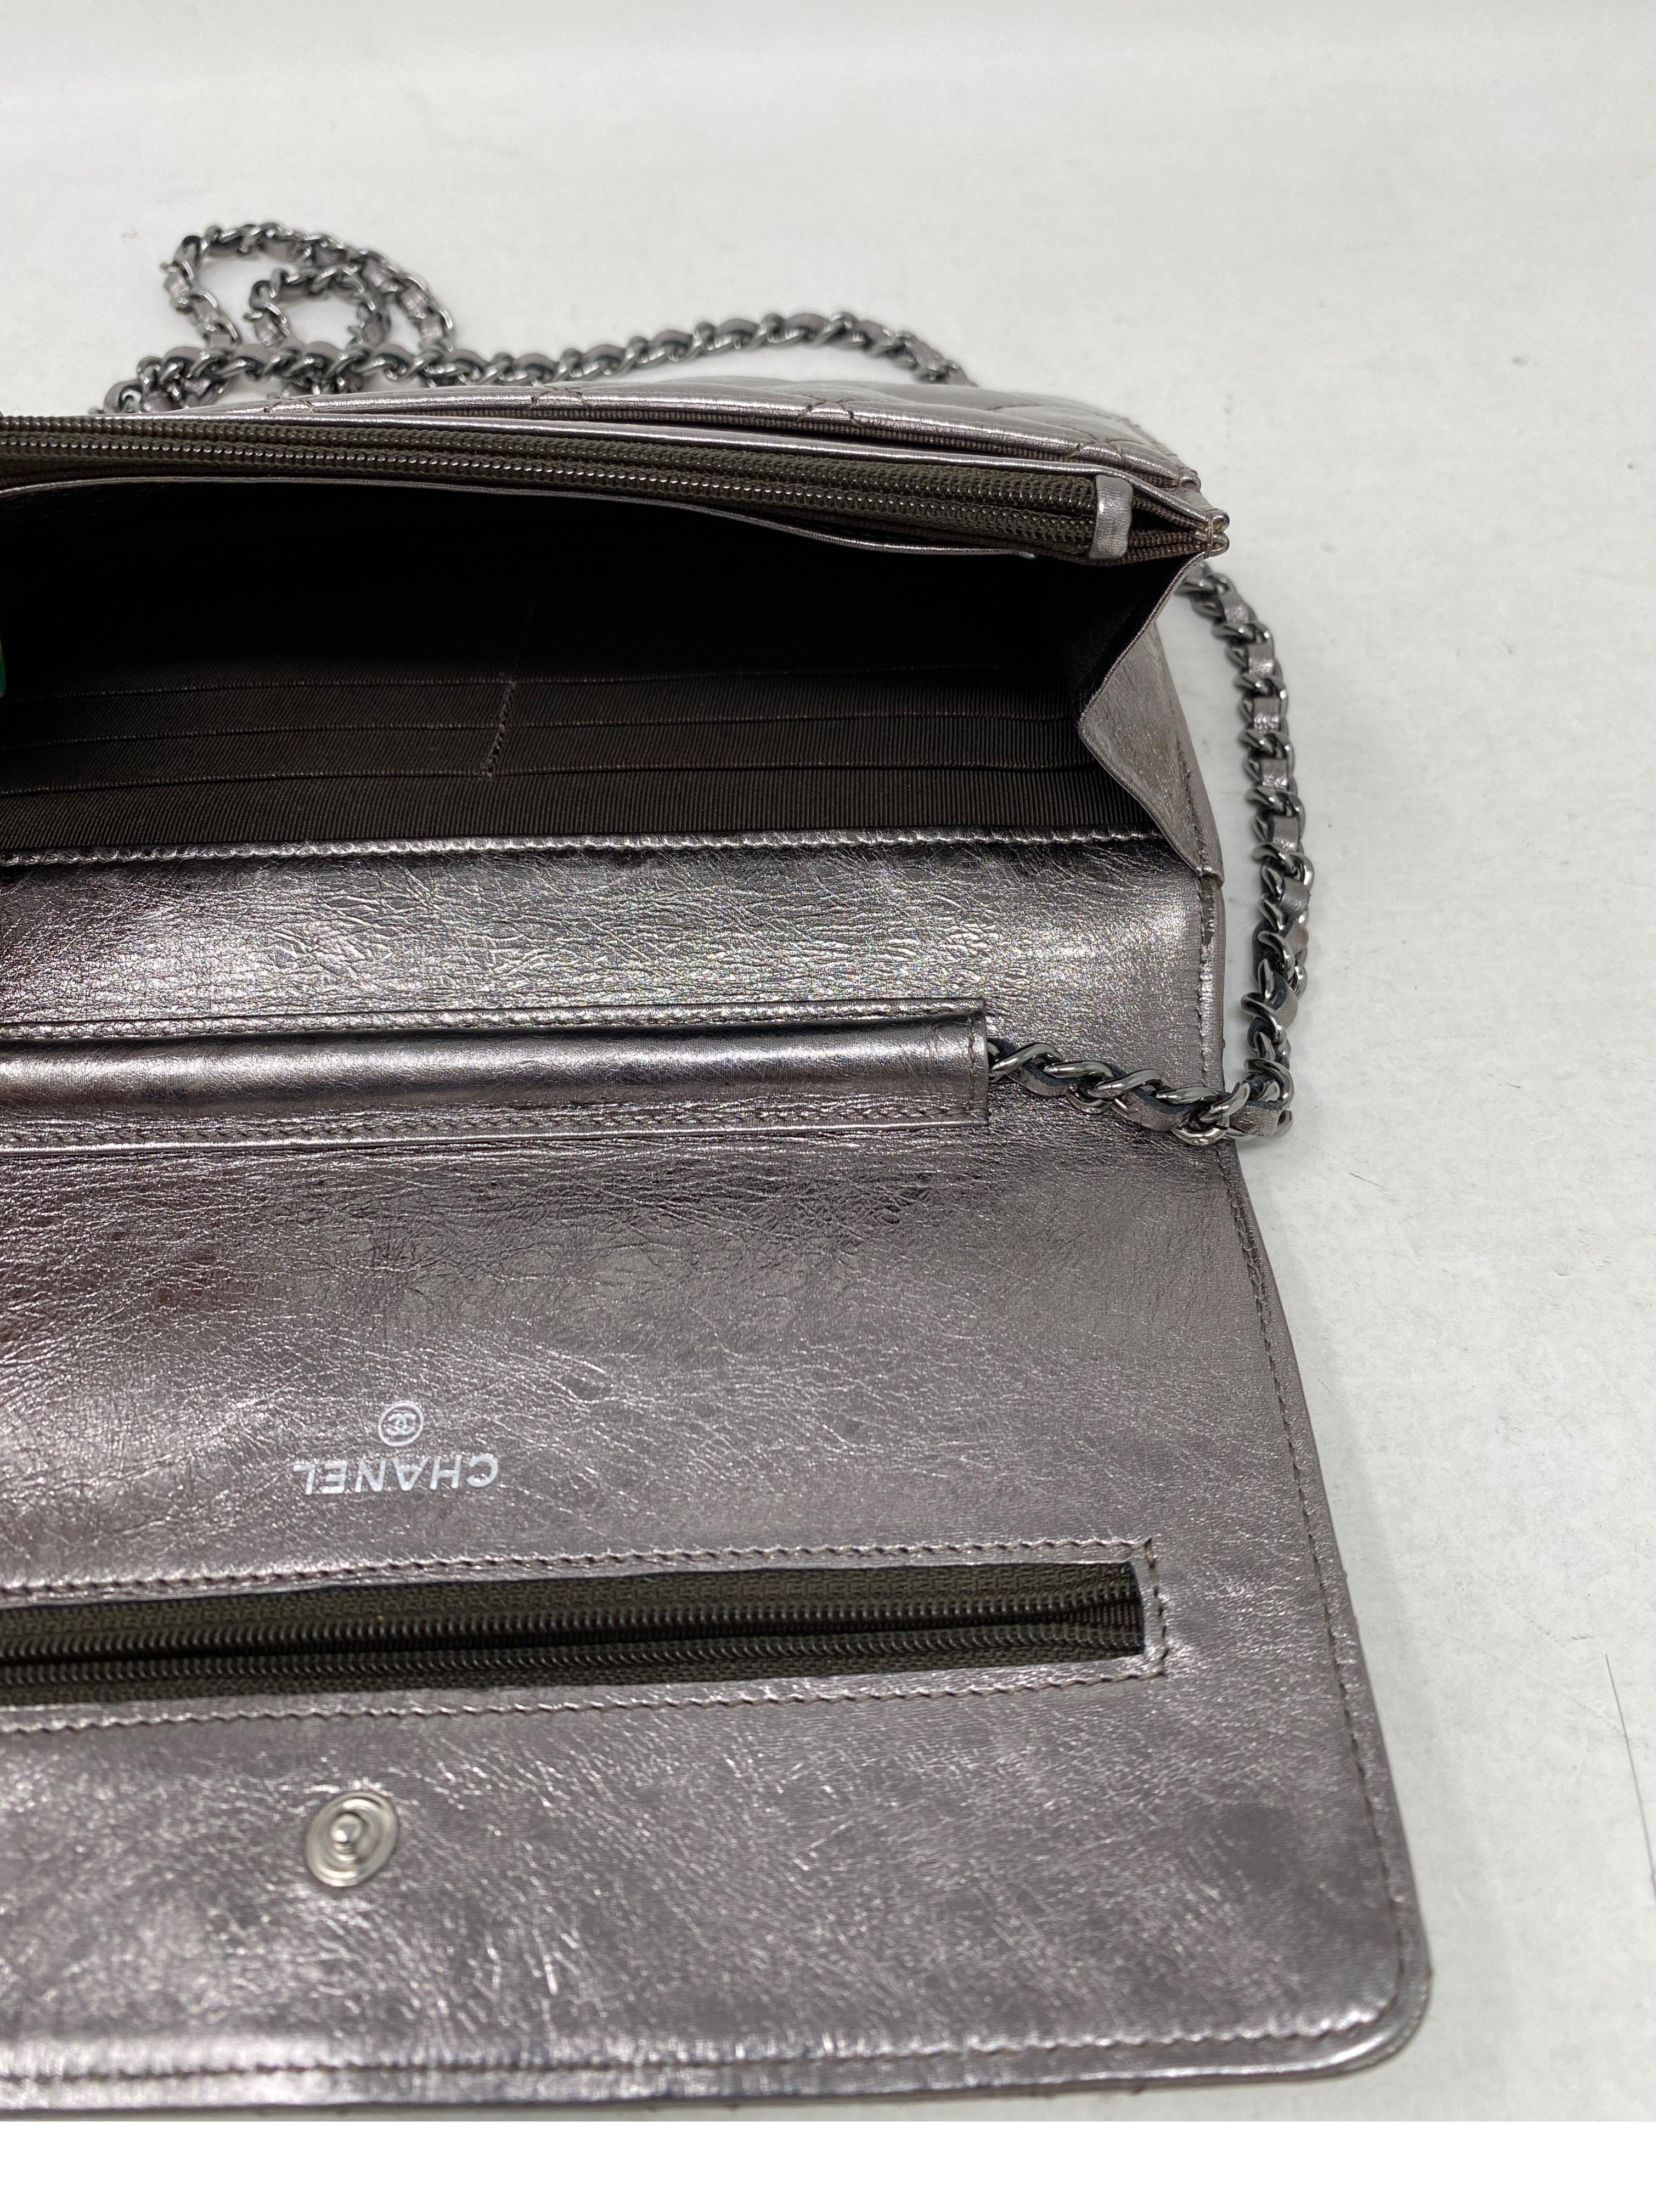 Chanel Silver Metallic Reissue Wallet On A Chain Bag 5